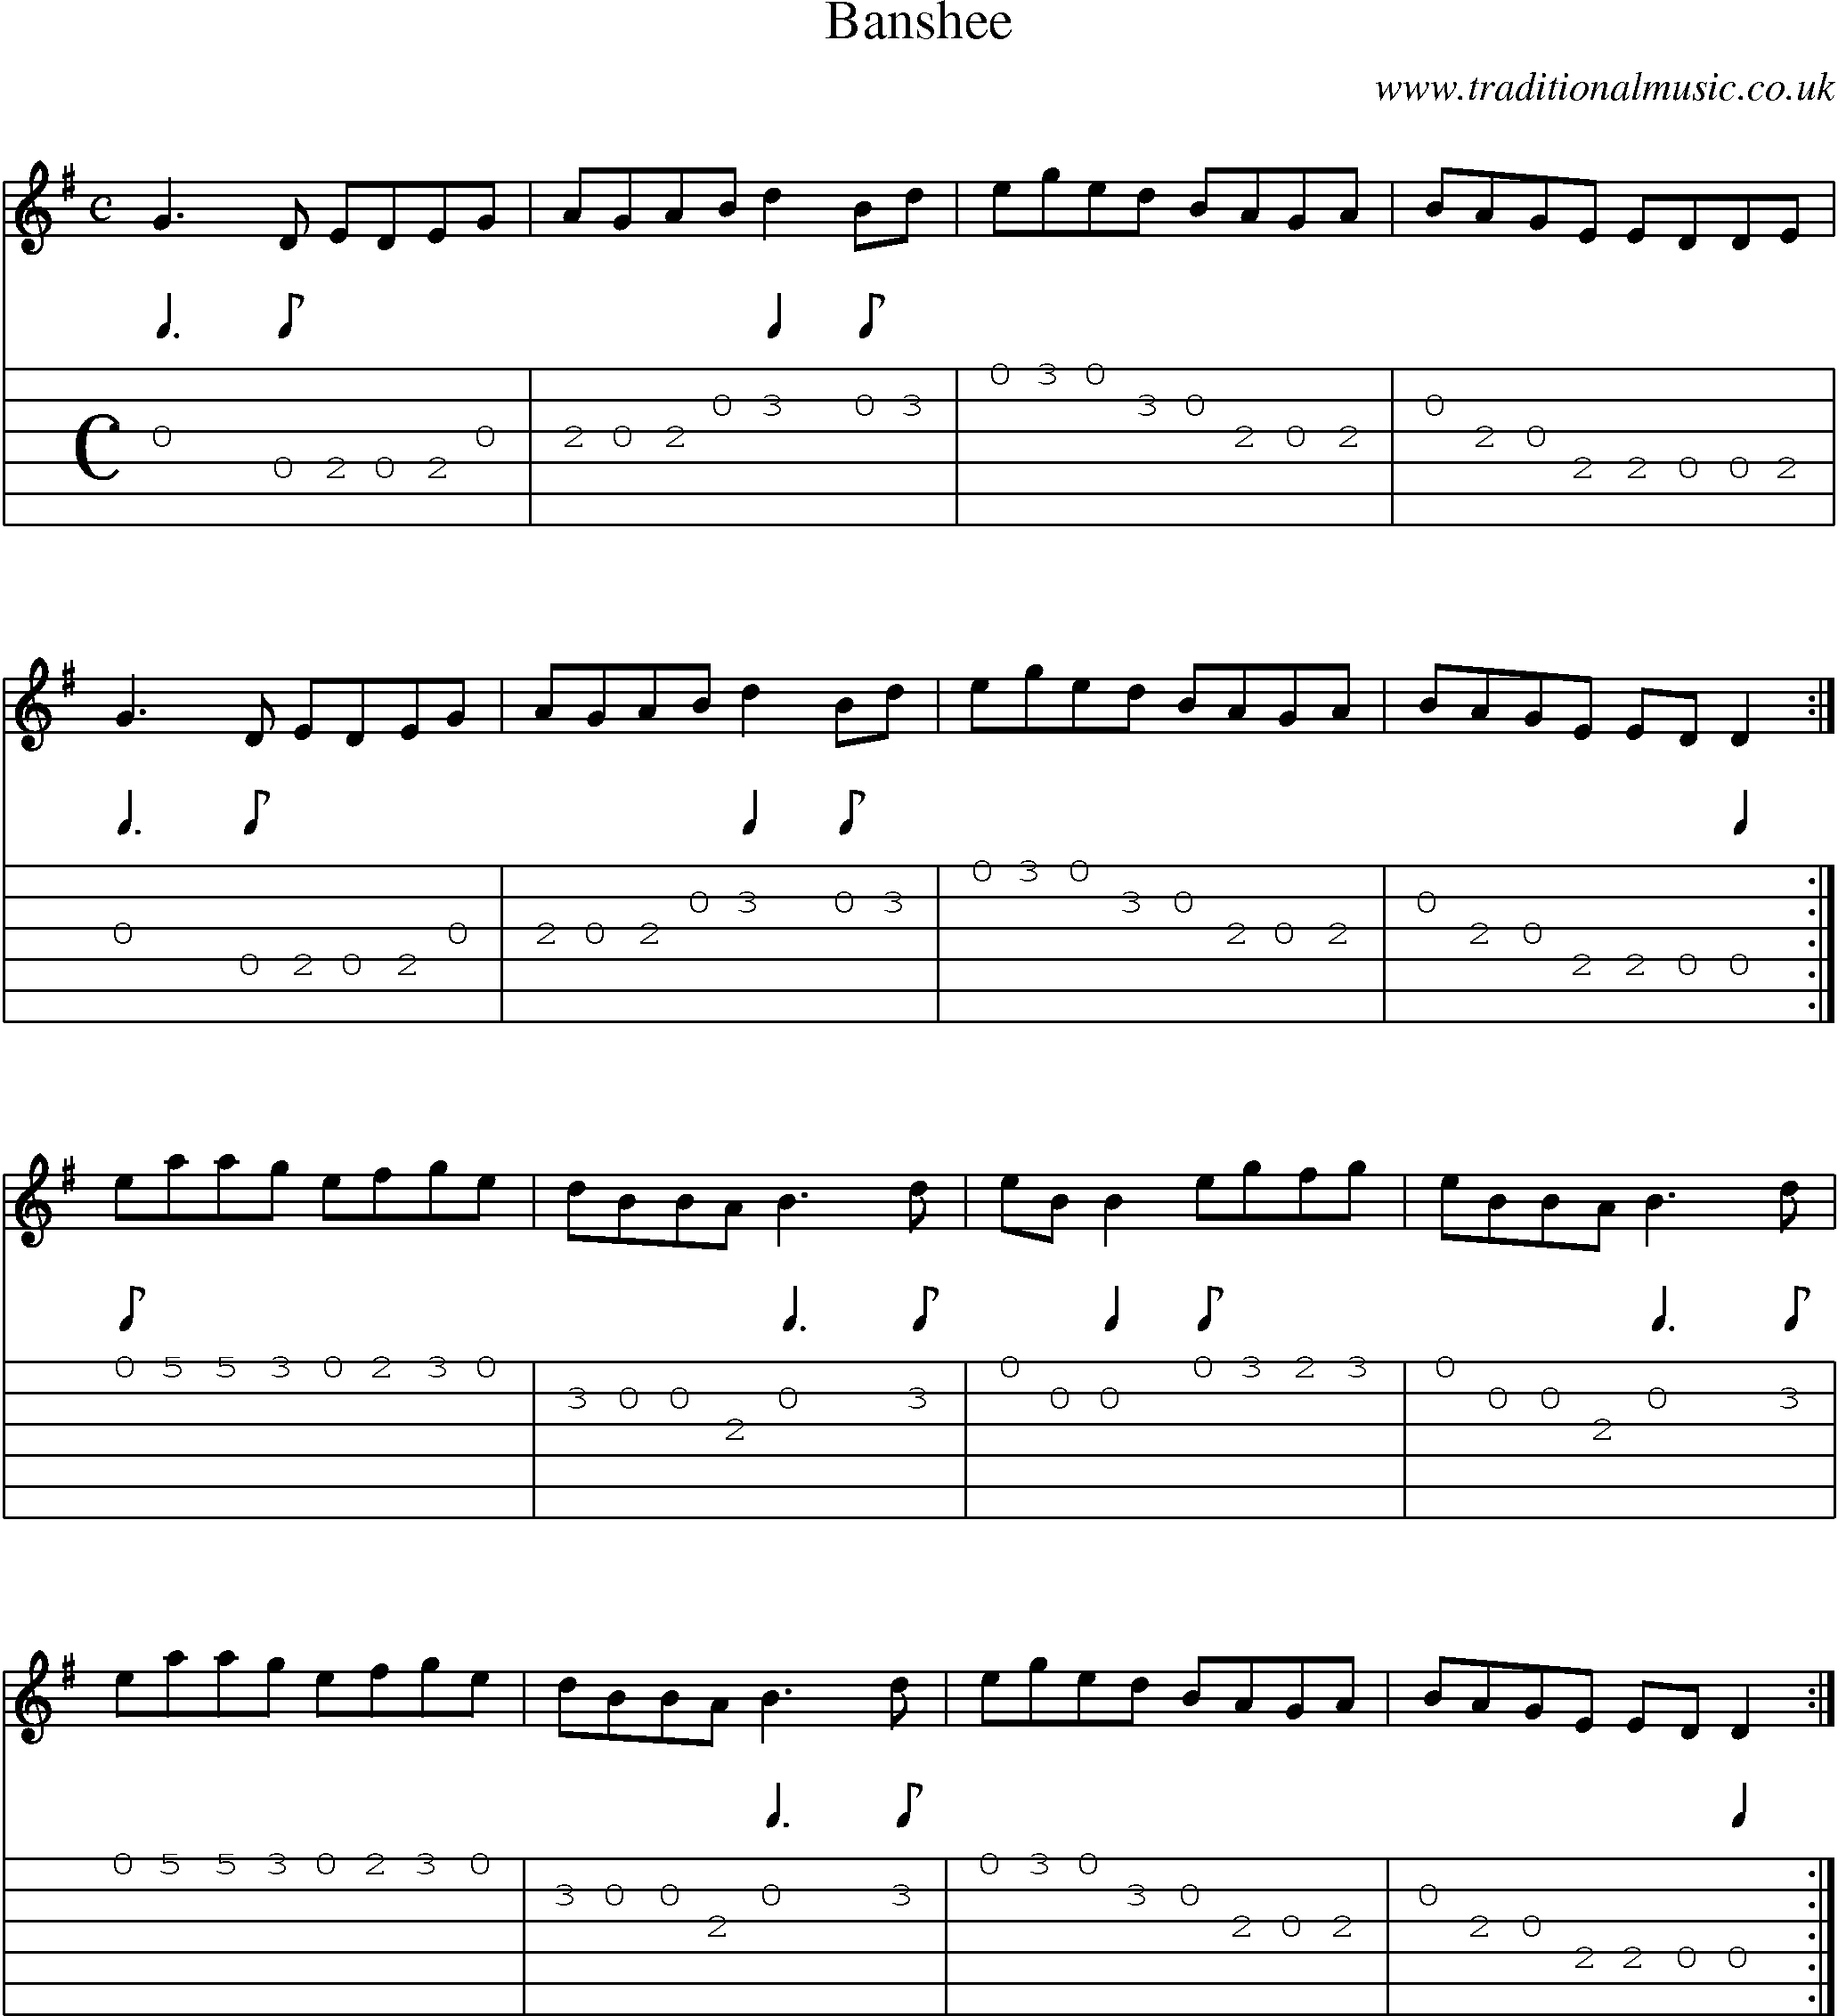 Music Score and Guitar Tabs for Banshee